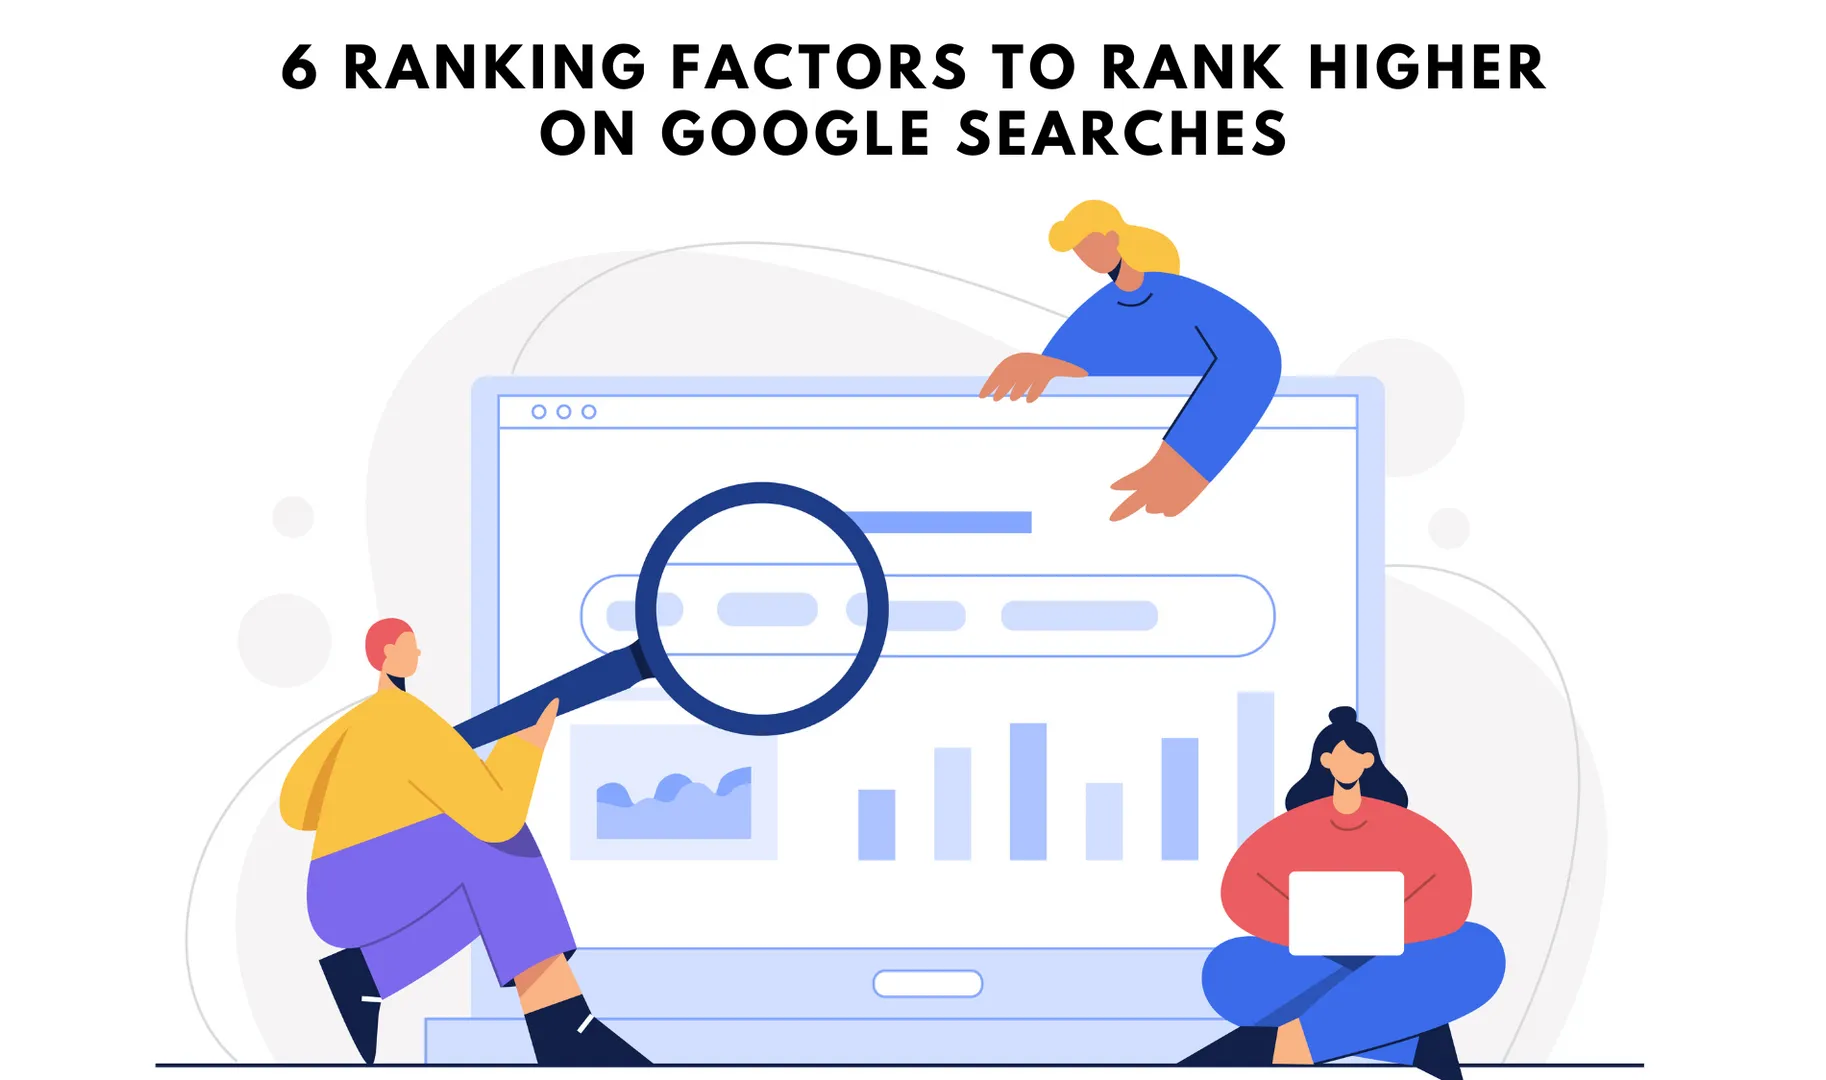 6 Ranking factors to Rank Higher on Google Searches

In the dynamic and ever-changing landscape of 2023, the digital realm demands a profound understanding of the factors that wield influence over search engines, including the mighty Google. To propel your website to new heights on the search results page and achieve optimal performance, you must master these critical elements.

Though there isn't a one-size-fits-all solution for securing a top-ranking position, arming yourself with knowledge of these essential factors can grant you a competitive edge. Empowered by this knowledge, you'll be able to optimize your website effectively and outshine the competition on Google's search rankings.

Ranking factors act as gatekeepers, meticulously evaluating webpage quality, relevance, and credibility. Given the continuous evolution of search engine algorithms, staying well-informed about these factors has never been more crucial. By earning recognition and trust from search engines, your website can soar to rank higher on Google search results.

Revealing the Enigmatic World of SEO in 2023:

1. Exceptional Content Quality

2. Conquer Topical Authority

3. Embrace Freshness and Relevance

4. Maximize the Impact of Internal Linking

5. Prioritize User Experience

6. Unearth the Perfect Keywords

Embarking on this enlightening journey with us, you'll gain profound insights into each ranking factor to rank higher on google, uncovering the secrets to navigate the dynamic world of SEO in 2023. These strategies will unlock the full potential of your website, capturing the hearts of users and gaining the favor of search engines like Google. Join us as we explore these elements in-depth, empowering you to excel and thrive in the digital sphere of 2023.

Click the link to read the full detailed Blog - https://www.serpple.com/blog/factors-to-rank-higher-on-google/?cmp=joinentre-promo